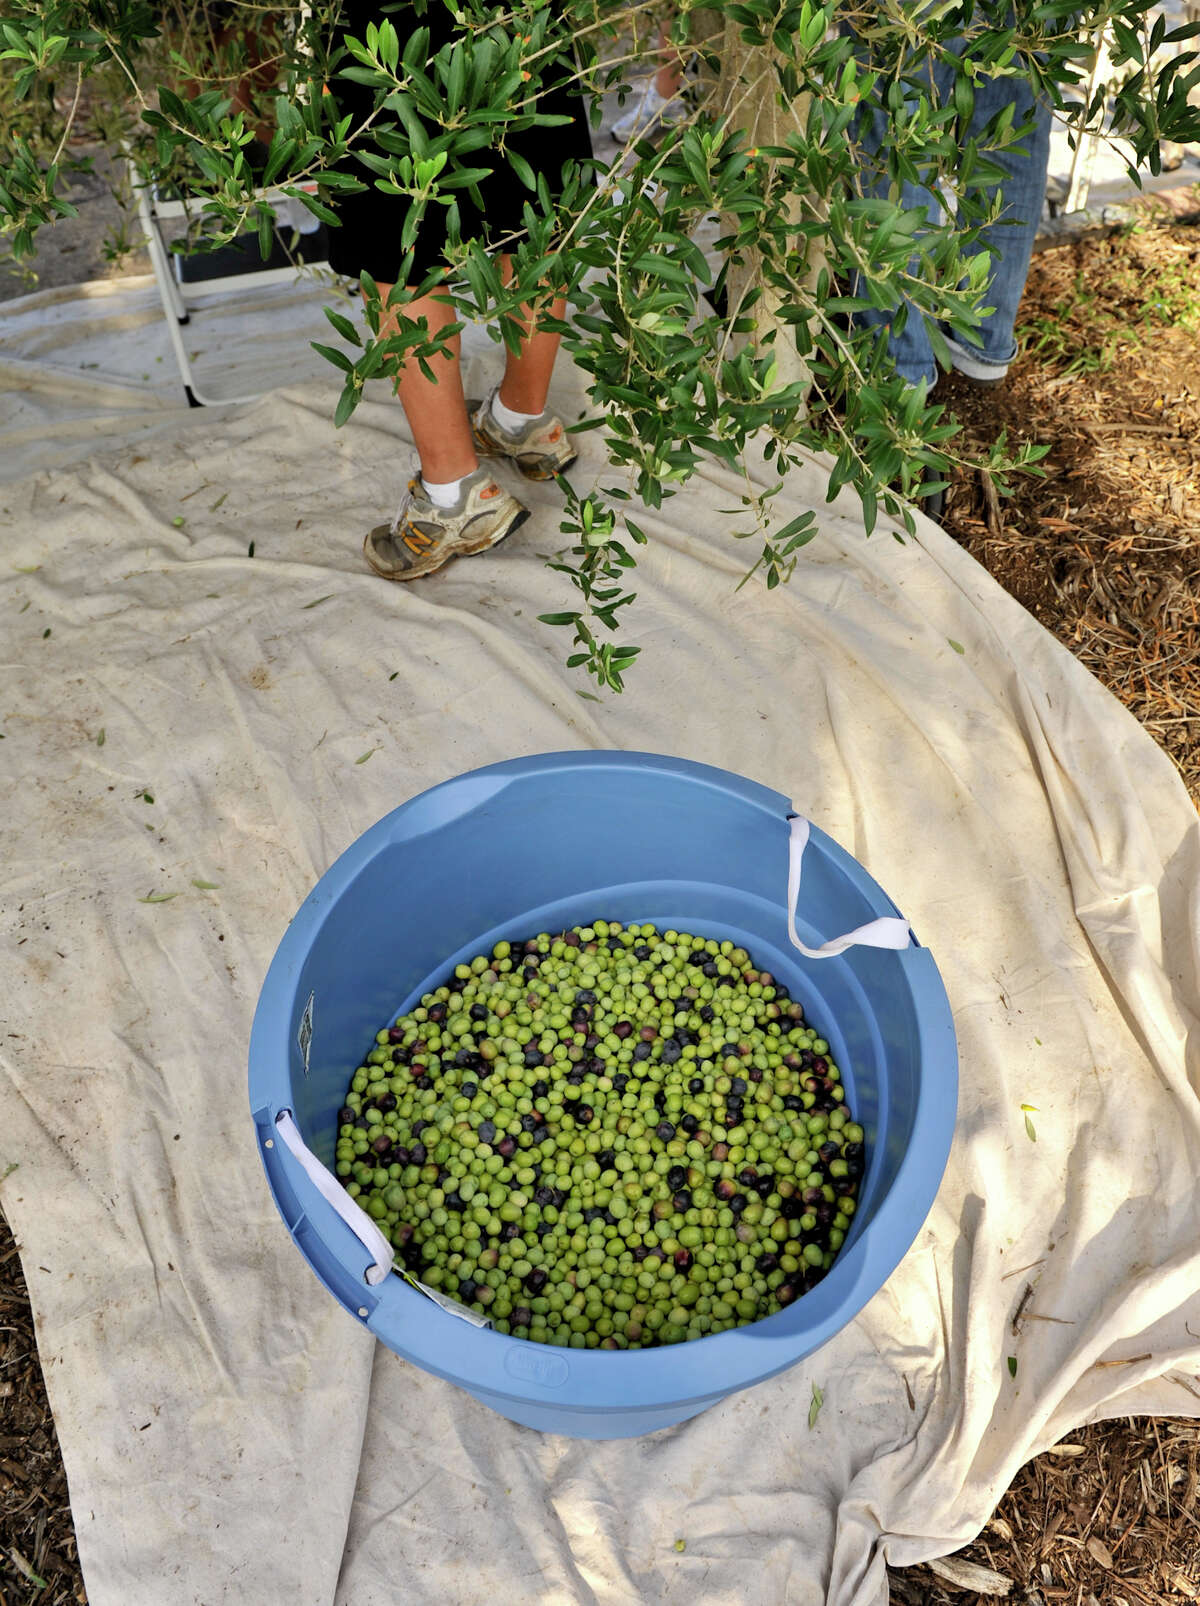  Olives fill a bucket on harvest day.